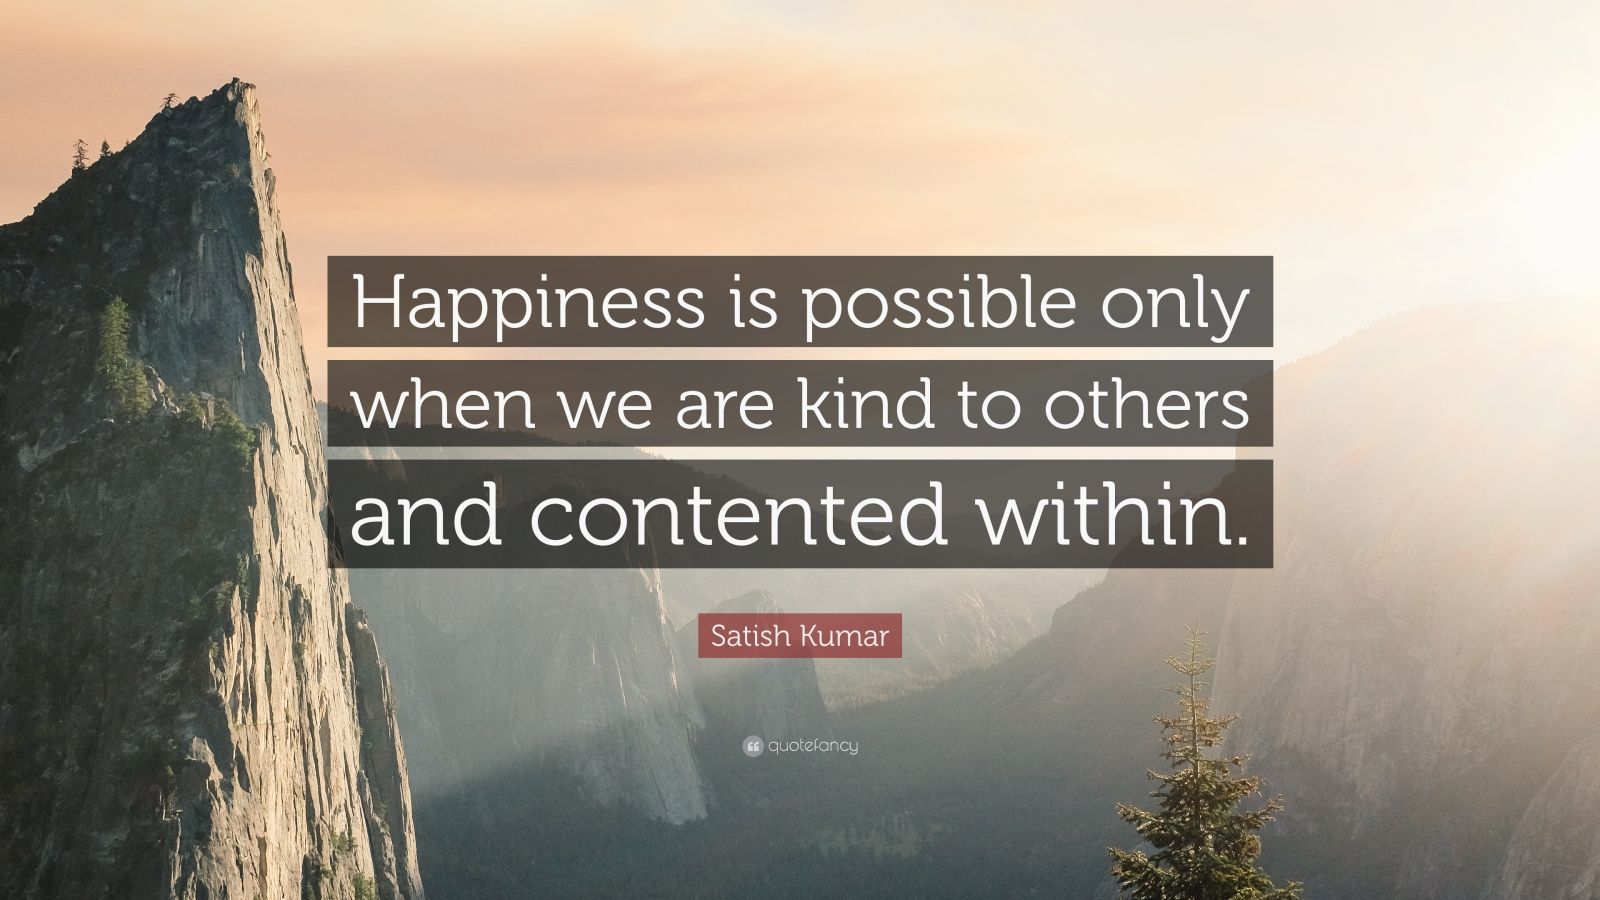 Satish Kumar Quote: “Happiness is possible only when we are kind to ...